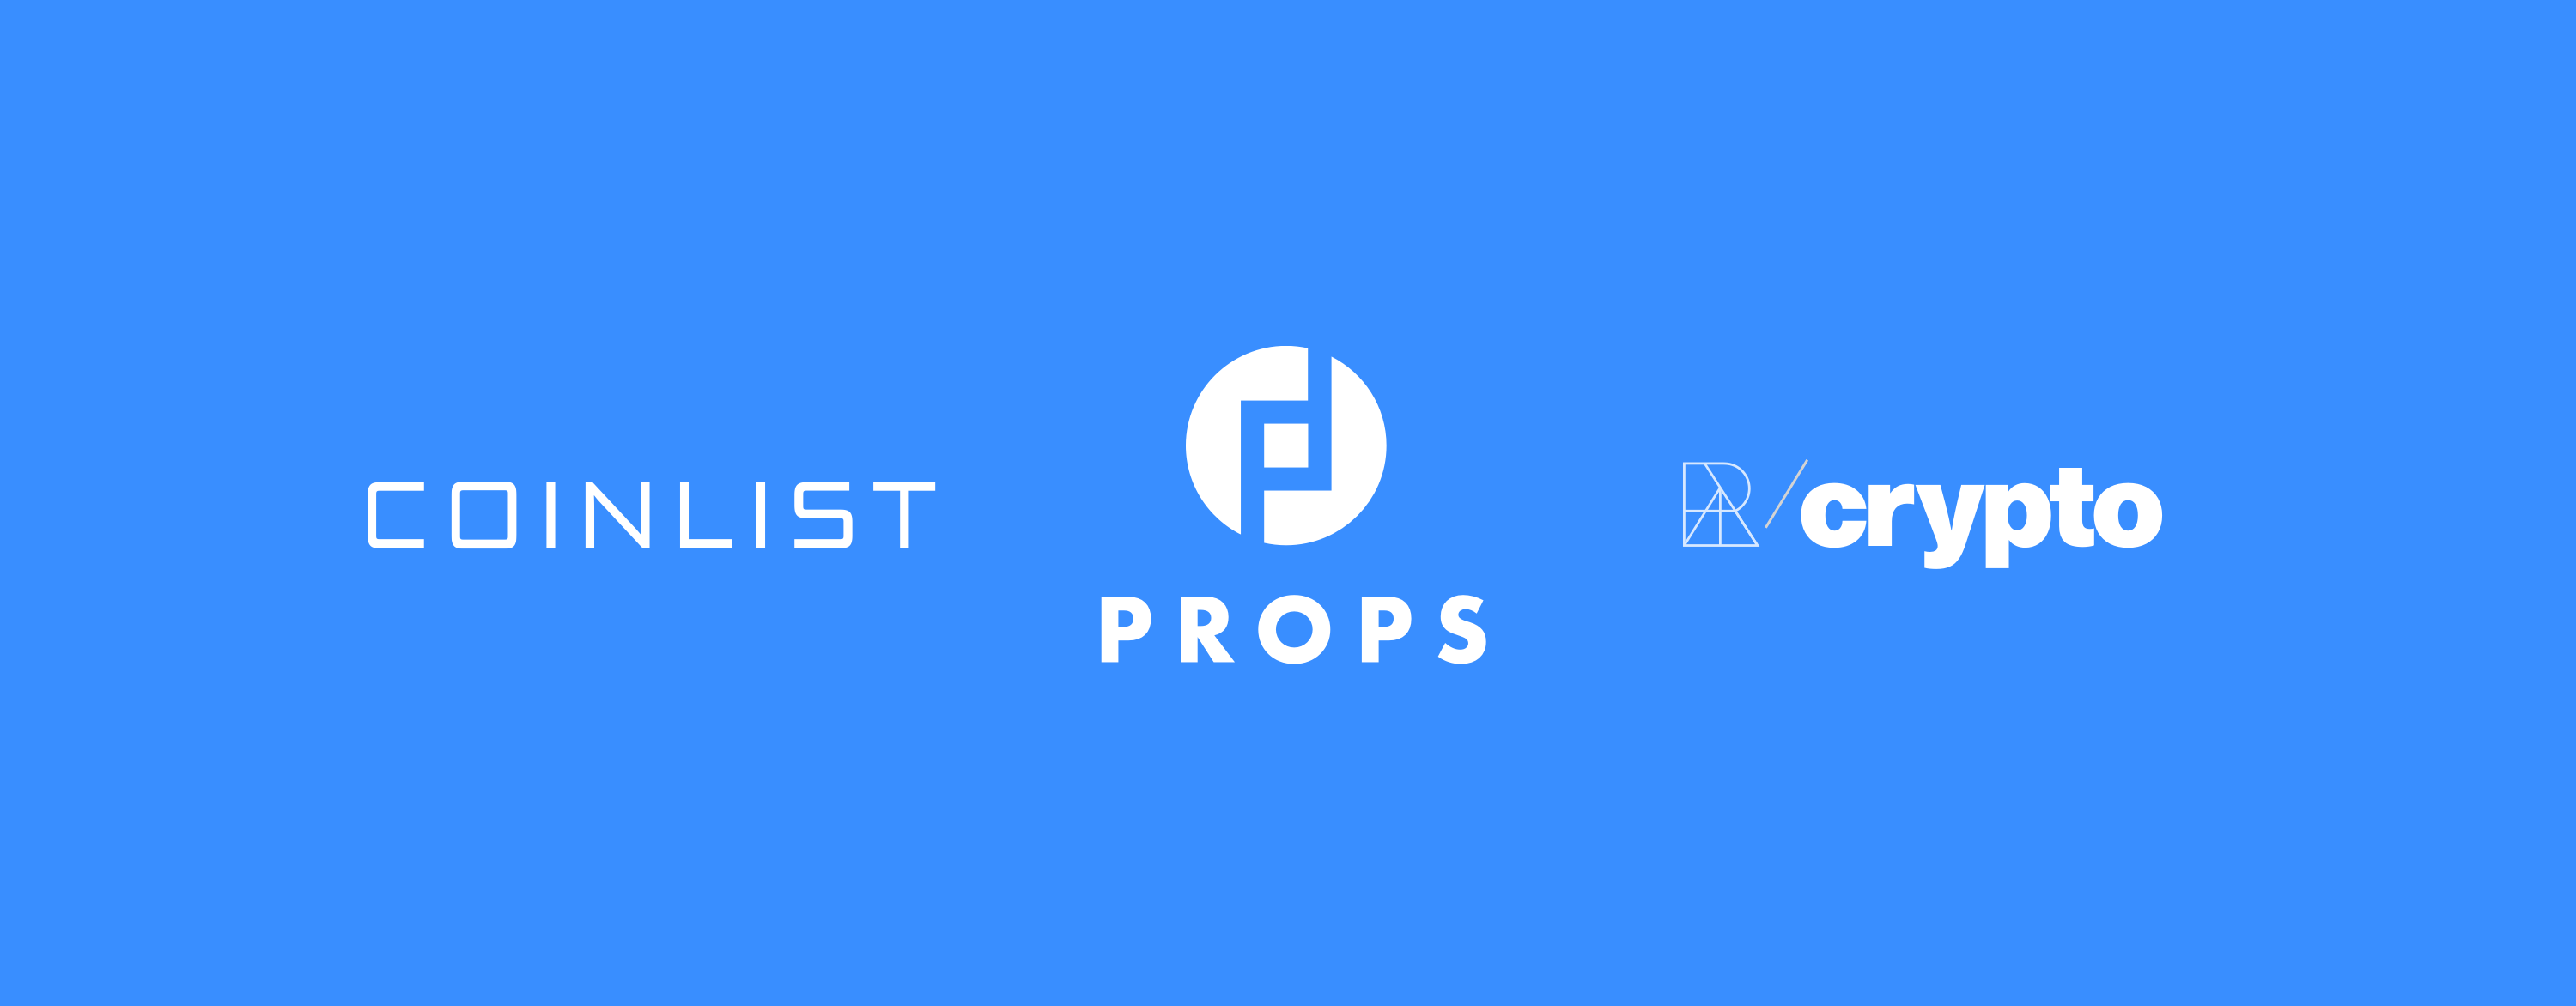 Announcing Partnerships with CoinList and Republic Crypto ...